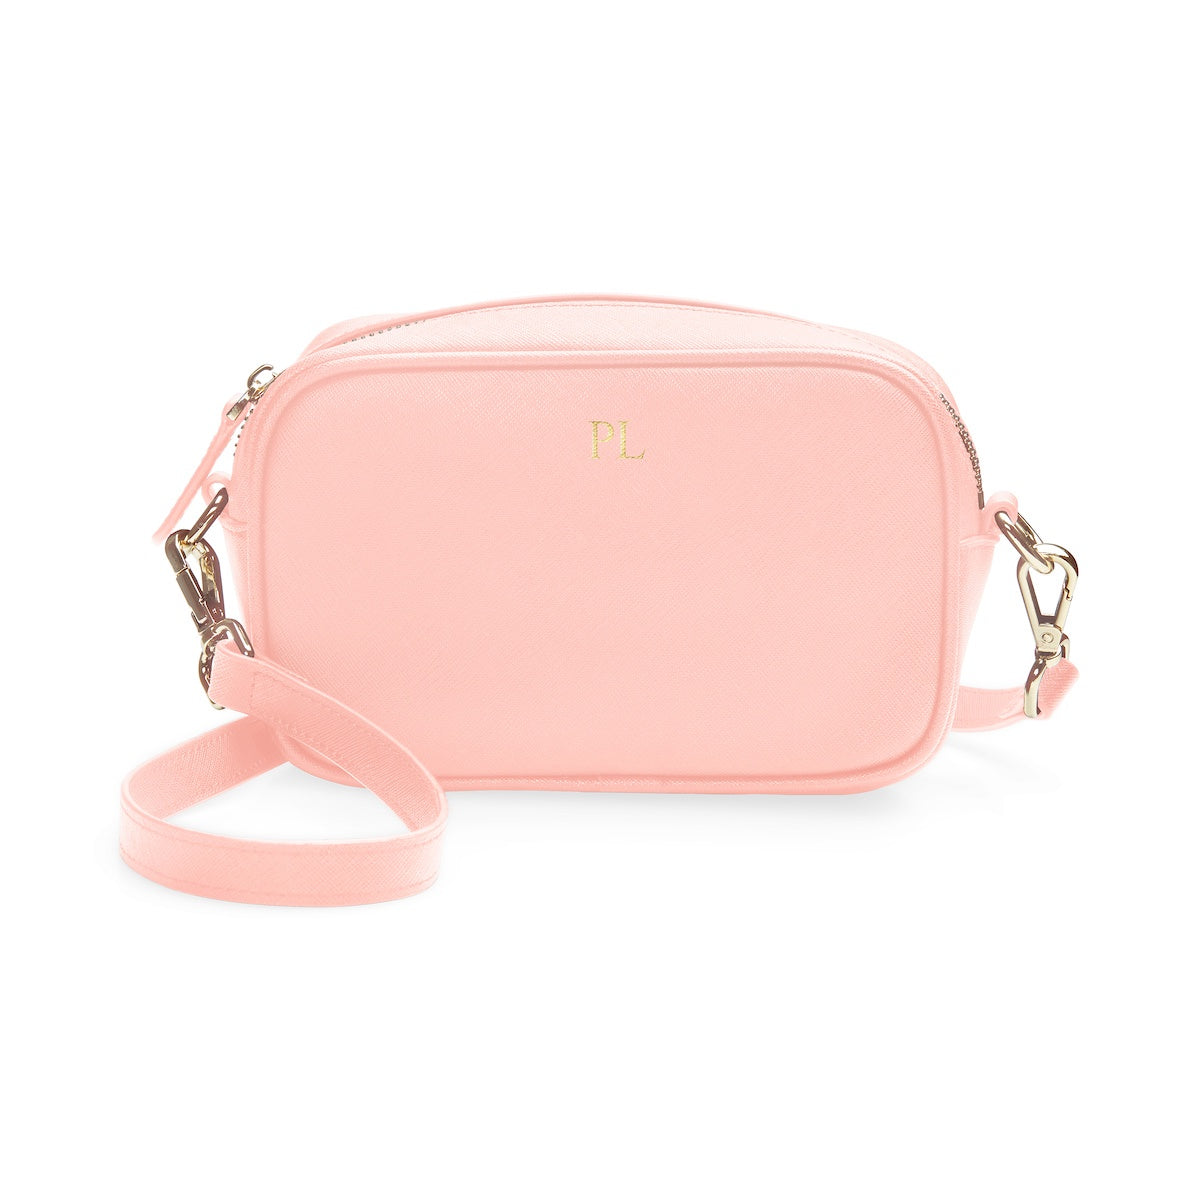 Crossbody Bag - Pale Pink Saffiano Leather